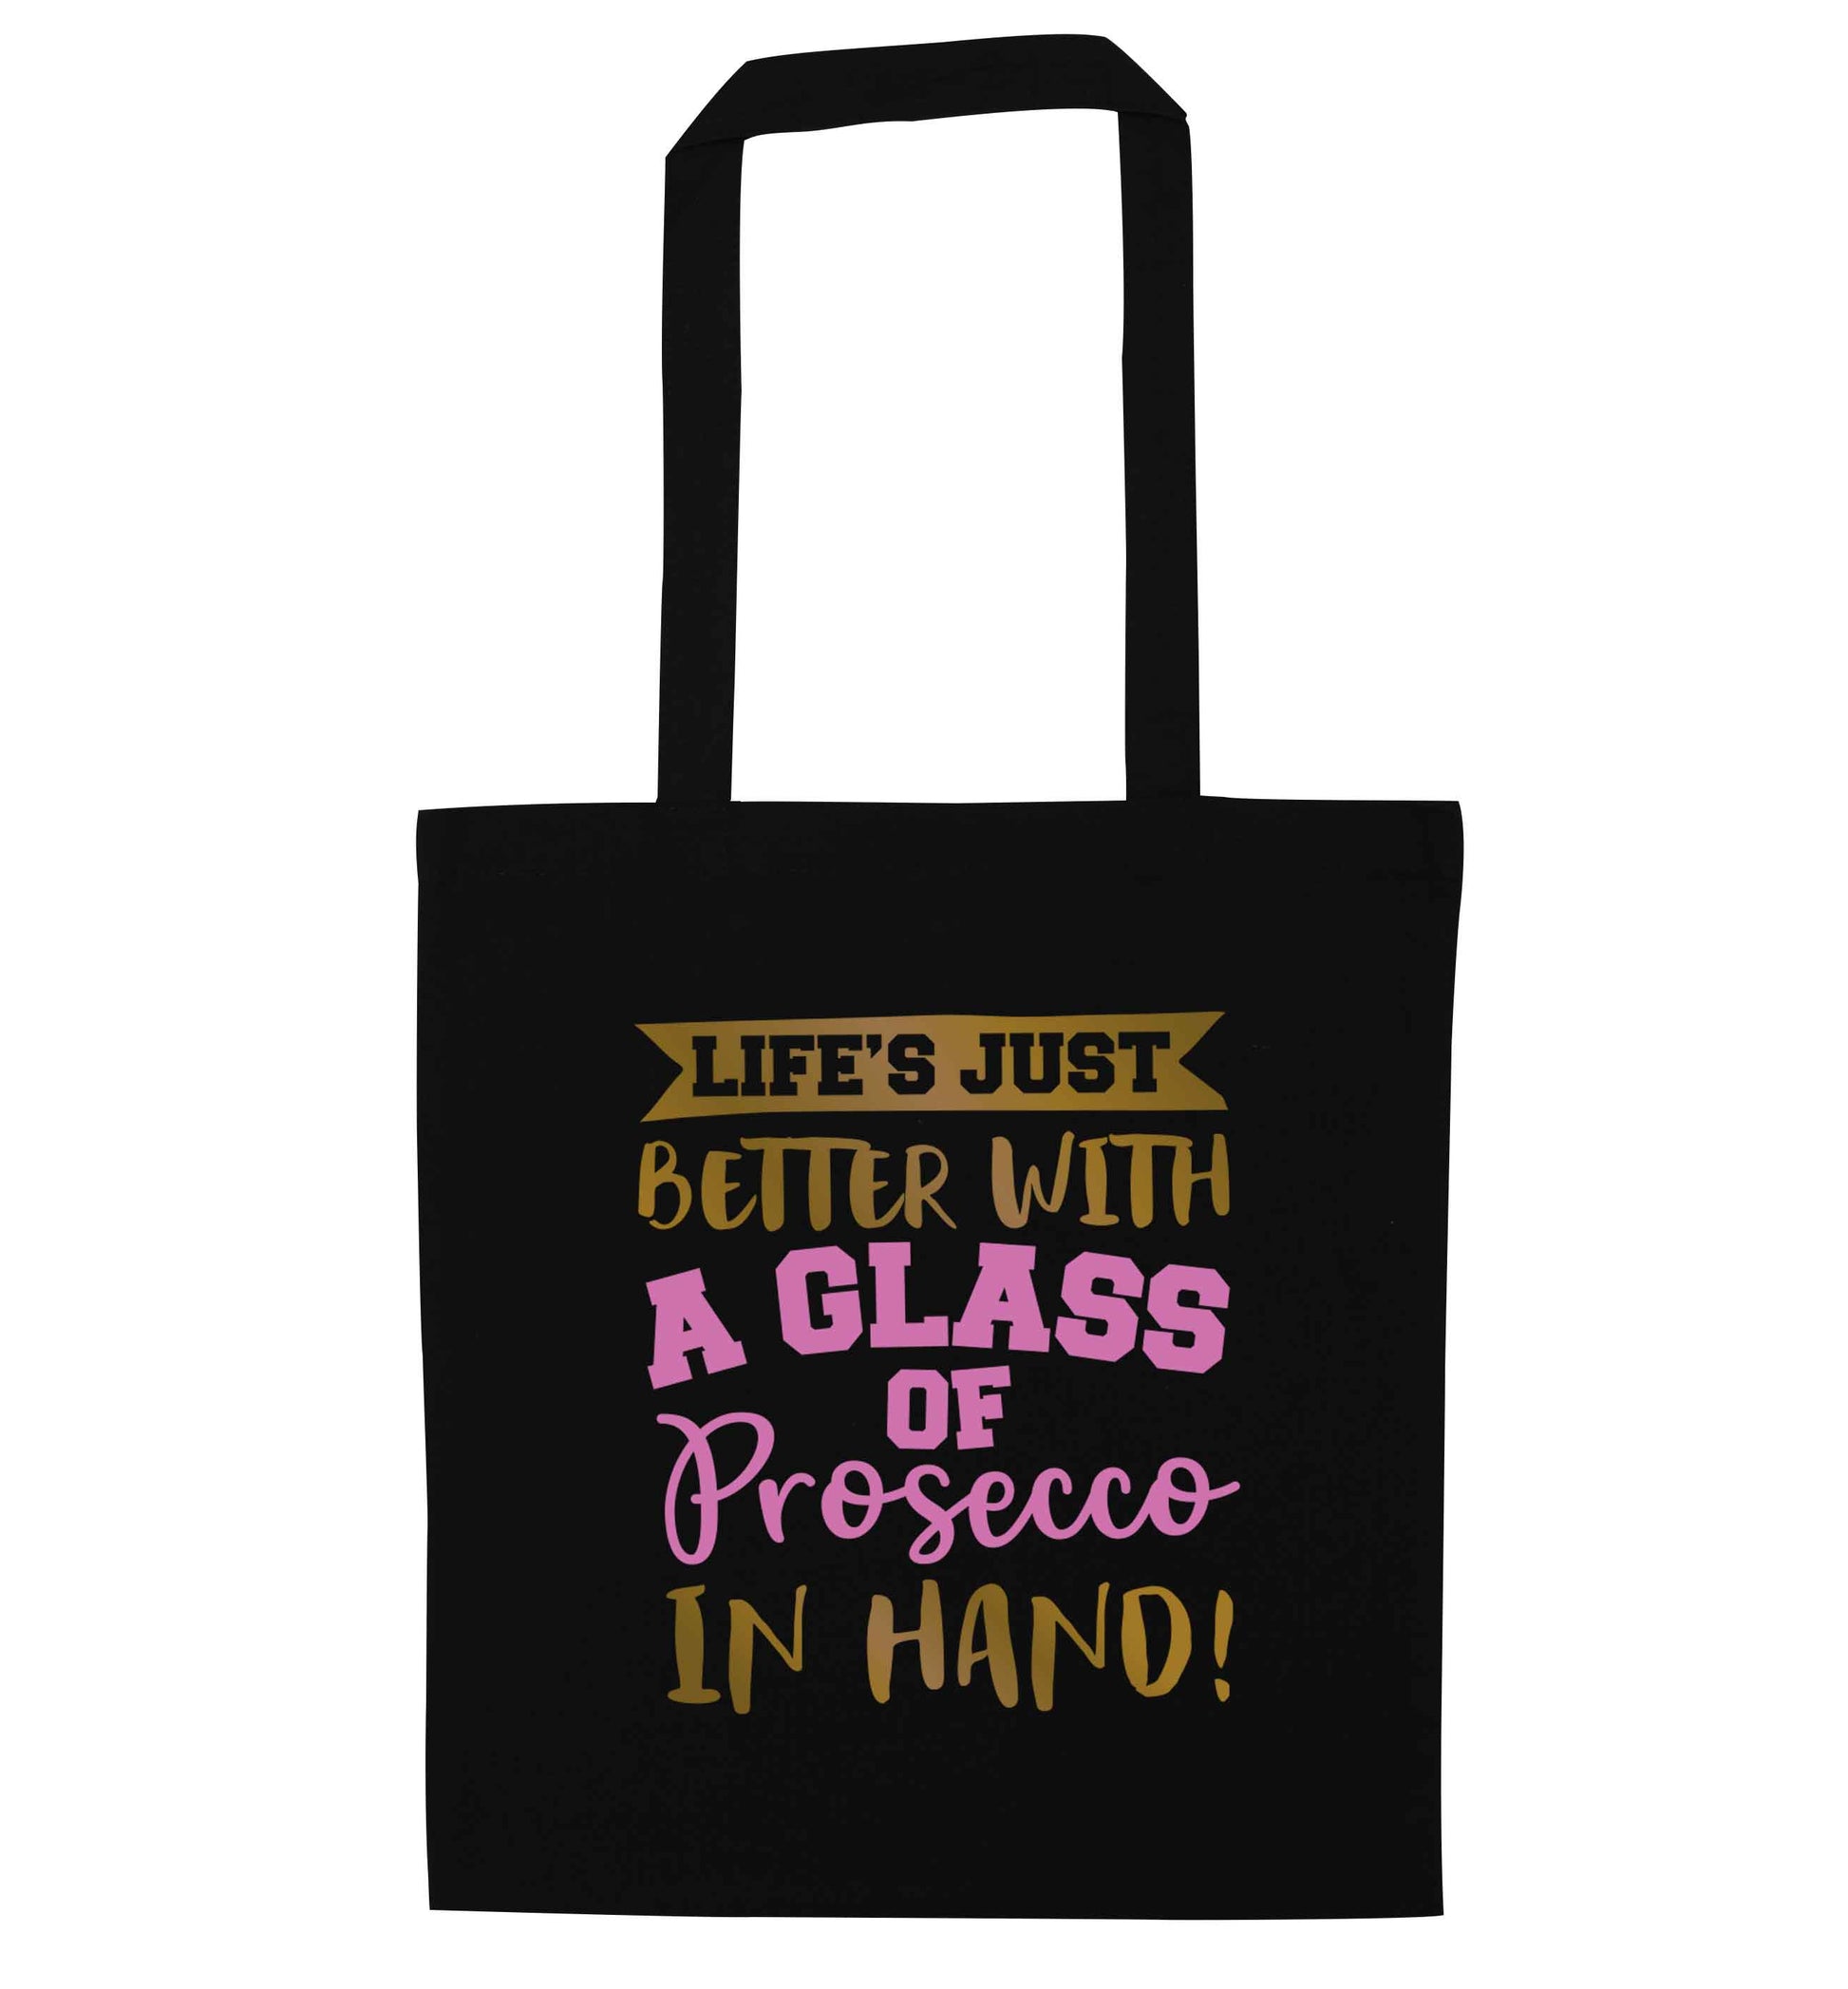 Life's just better with a glass of prosecco in hand black tote bag